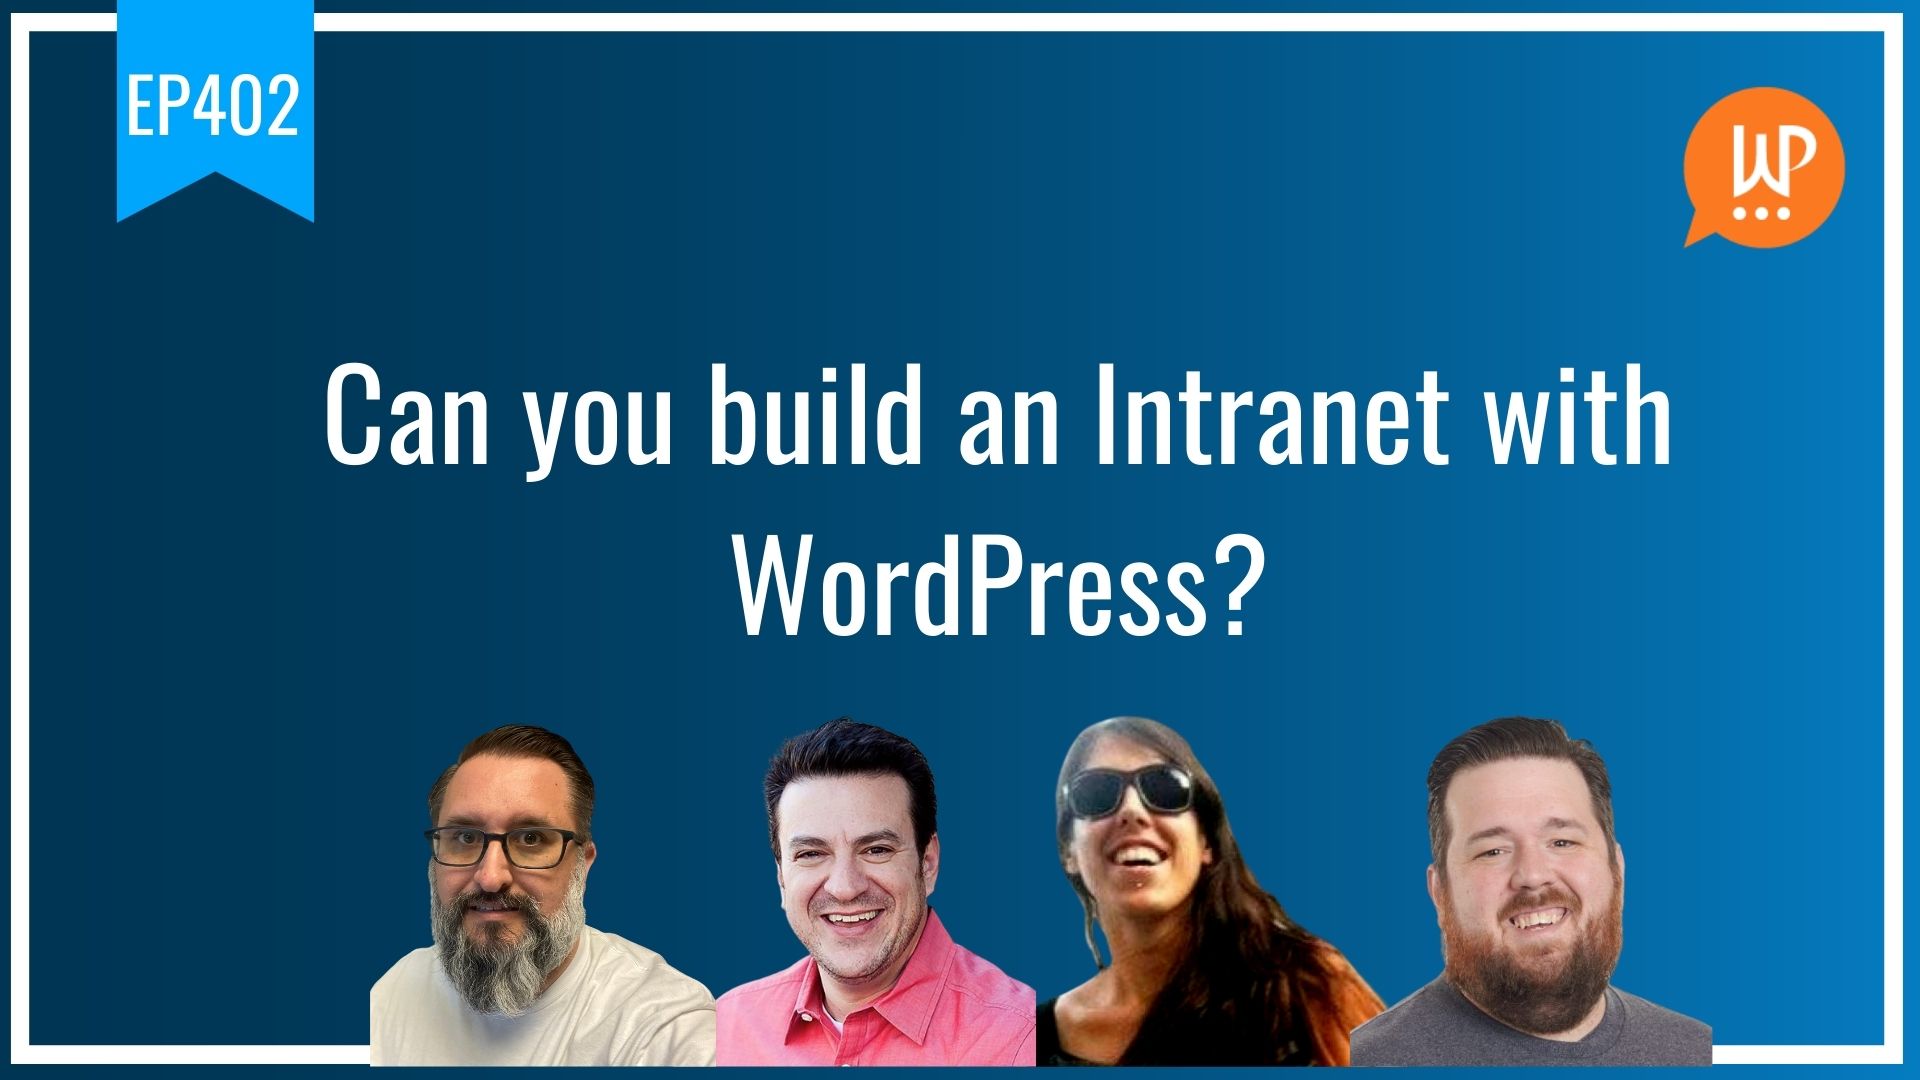 EP402 – Can you build an Intranet with WordPress?